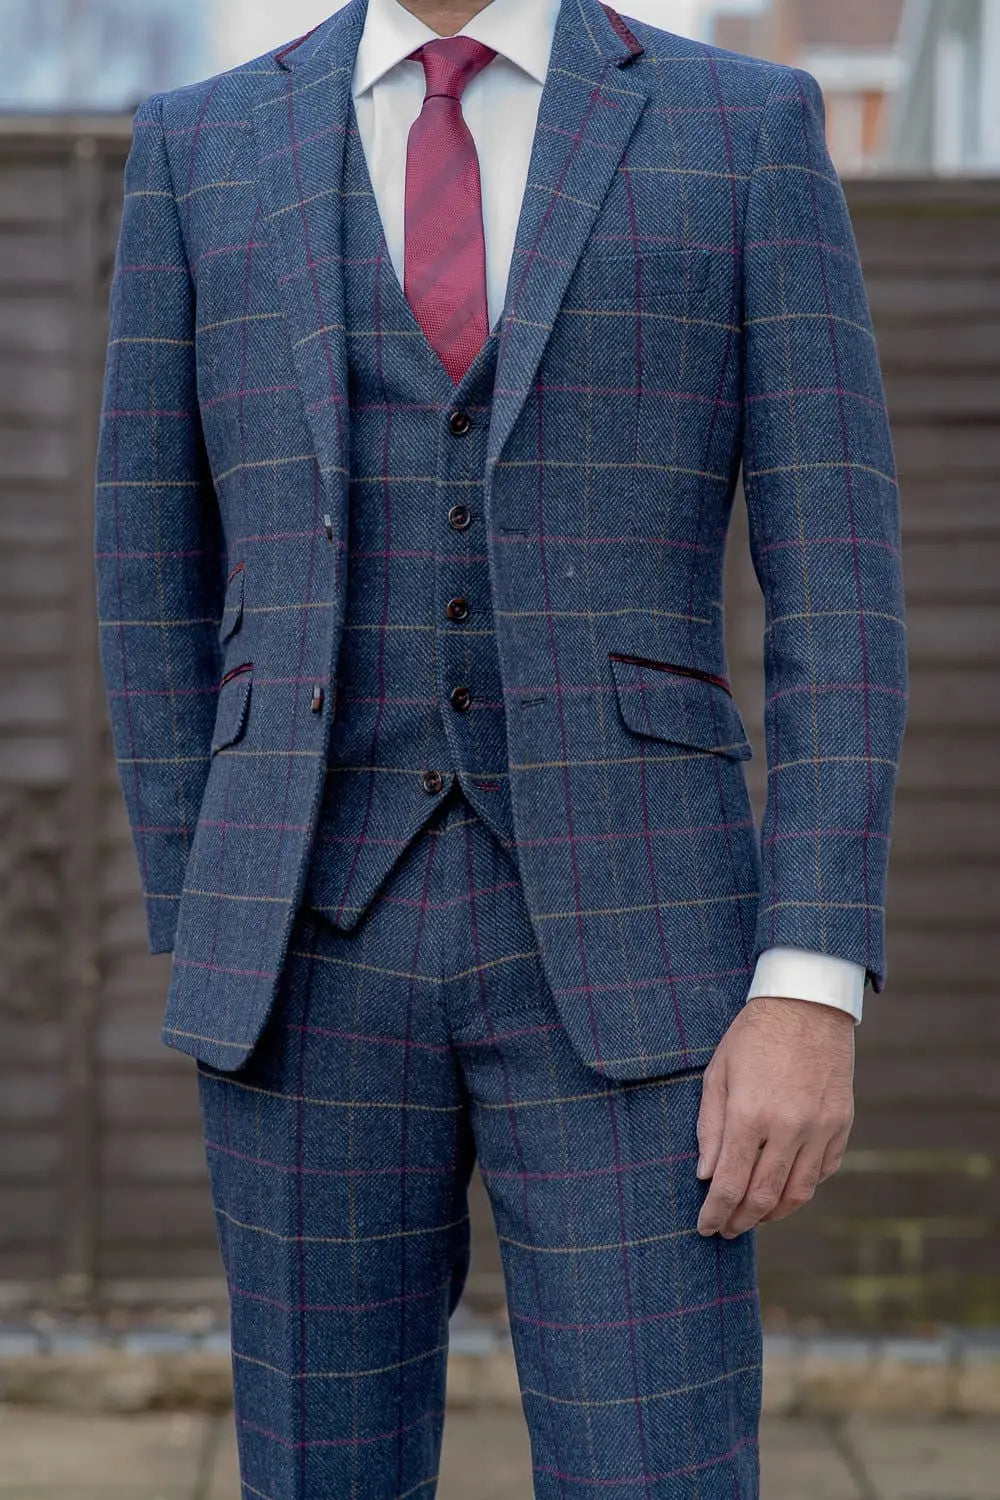 when to wear a tweed suit